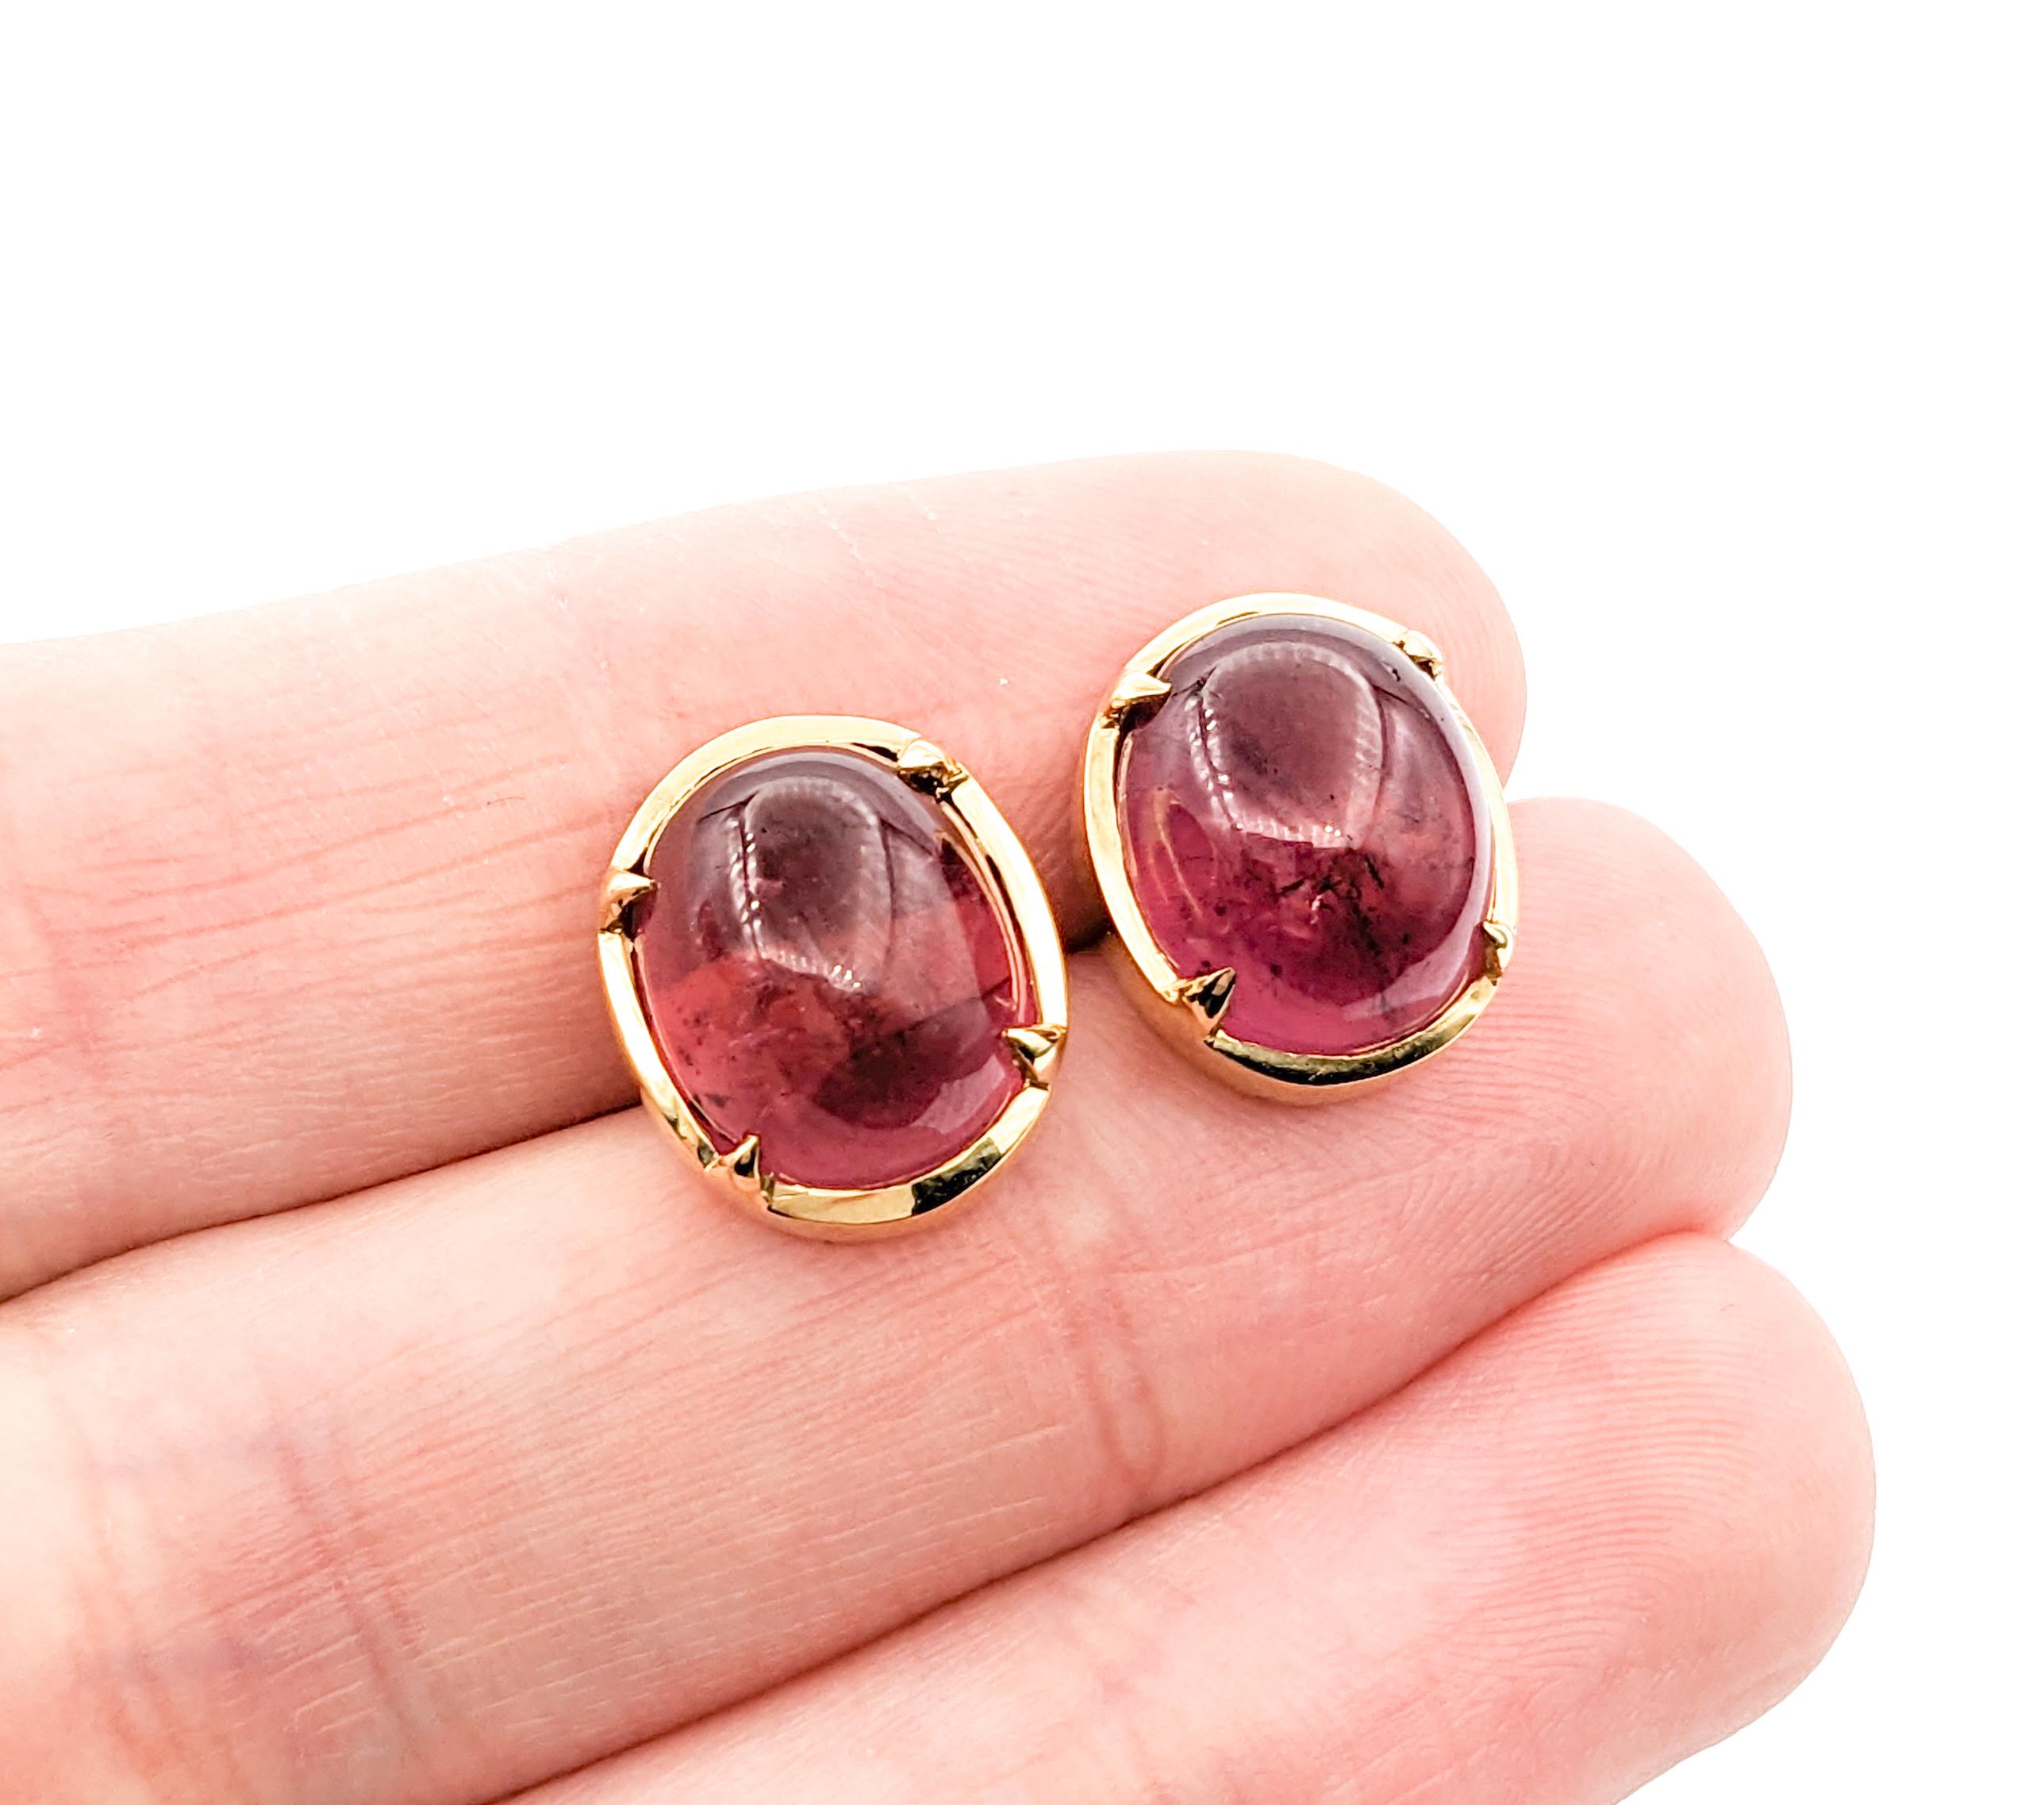 15.5ctw Cabochon Pink Tourmaline Earrings In Yellow Gold In Excellent Condition For Sale In Bloomington, MN